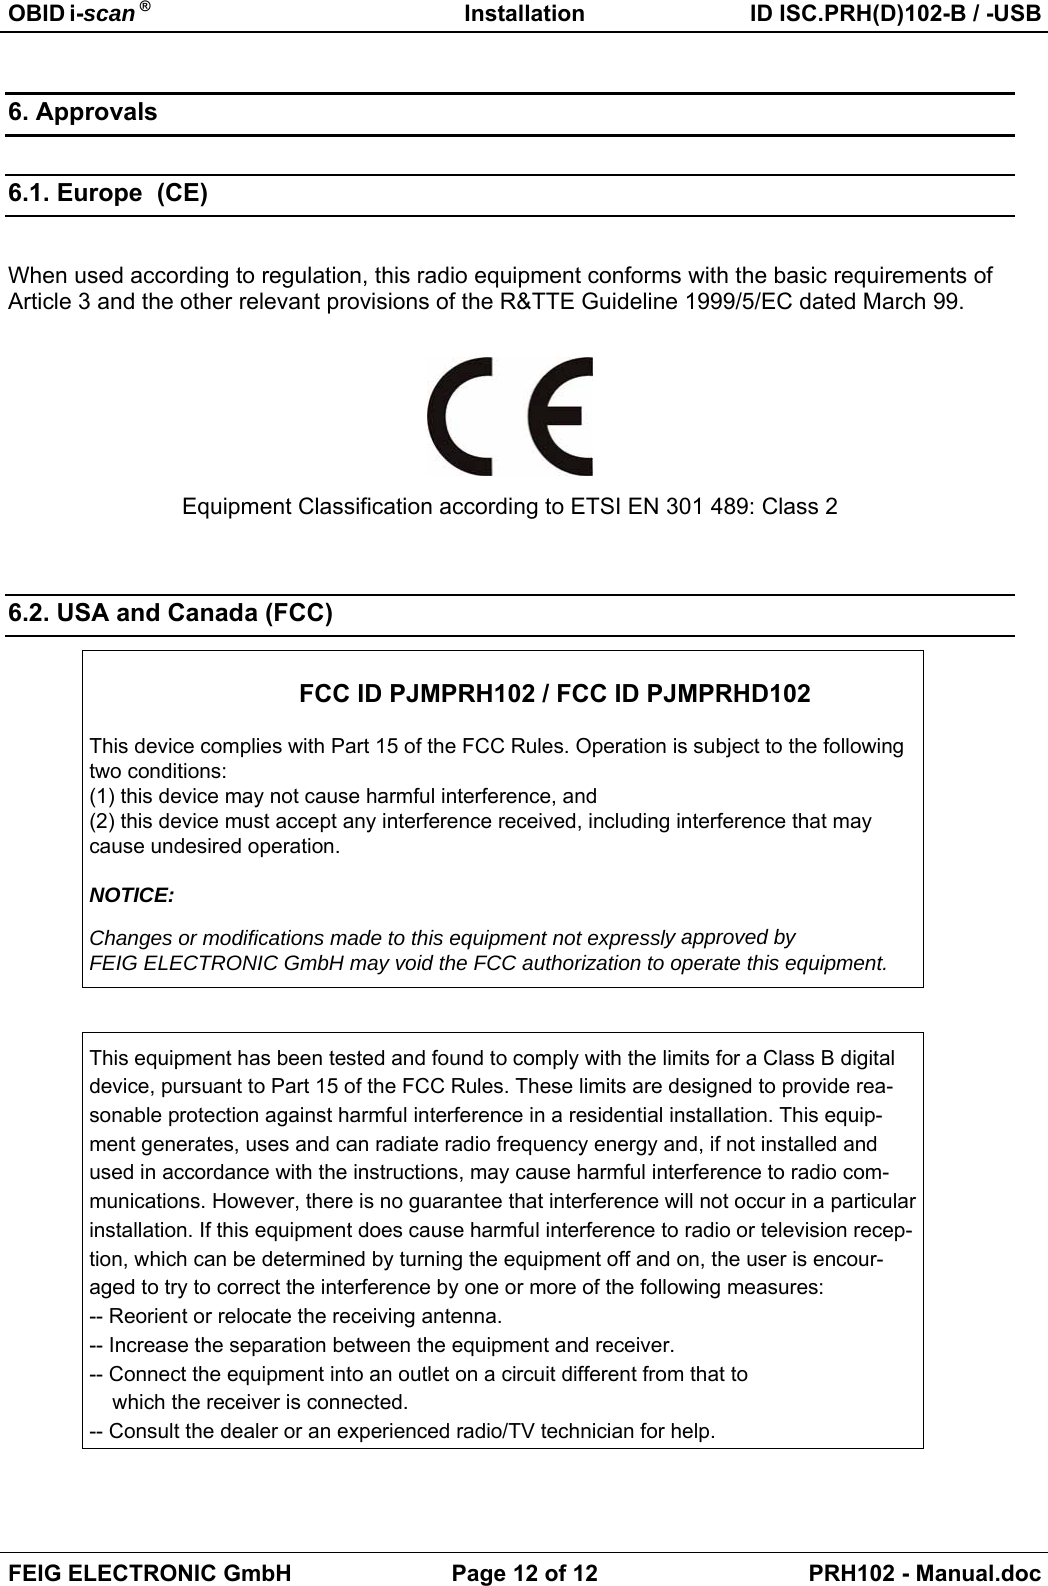 OBID i-scan ® Installation ID ISC.PRH(D)102-B / -USBFEIG ELECTRONIC GmbH Page 12 of 12 PRH102 - Manual.doc6. Approvals6.1. Europe  (CE)When used according to regulation, this radio equipment conforms with the basic requirements ofArticle 3 and the other relevant provisions of the R&amp;TTE Guideline 1999/5/EC dated March 99.Equipment Classification according to ETSI EN 301 489: Class 26.2. USA and Canada (FCC)FCC ID PJMPRH102 / FCC ID PJMPRHD102This device complies with Part 15 of the FCC Rules. Operation is subject to the followingtwo conditions:(1) this device may not cause harmful interference, and(2) this device must accept any interference received, including interference that maycause undesired operation.NOTICE:Changes or modifications made to this equipment not expressly approved byFEIG ELECTRONIC GmbH may void the FCC authorization to operate this equipment.This equipment has been tested and found to comply with the limits for a Class B digitaldevice, pursuant to Part 15 of the FCC Rules. These limits are designed to provide rea-sonable protection against harmful interference in a residential installation. This equip-ment generates, uses and can radiate radio frequency energy and, if not installed andused in accordance with the instructions, may cause harmful interference to radio com-munications. However, there is no guarantee that interference will not occur in a particularinstallation. If this equipment does cause harmful interference to radio or television recep-tion, which can be determined by turning the equipment off and on, the user is encour-aged to try to correct the interference by one or more of the following measures:-- Reorient or relocate the receiving antenna.-- Increase the separation between the equipment and receiver.-- Connect the equipment into an outlet on a circuit different from that to    which the receiver is connected.-- Consult the dealer or an experienced radio/TV technician for help.